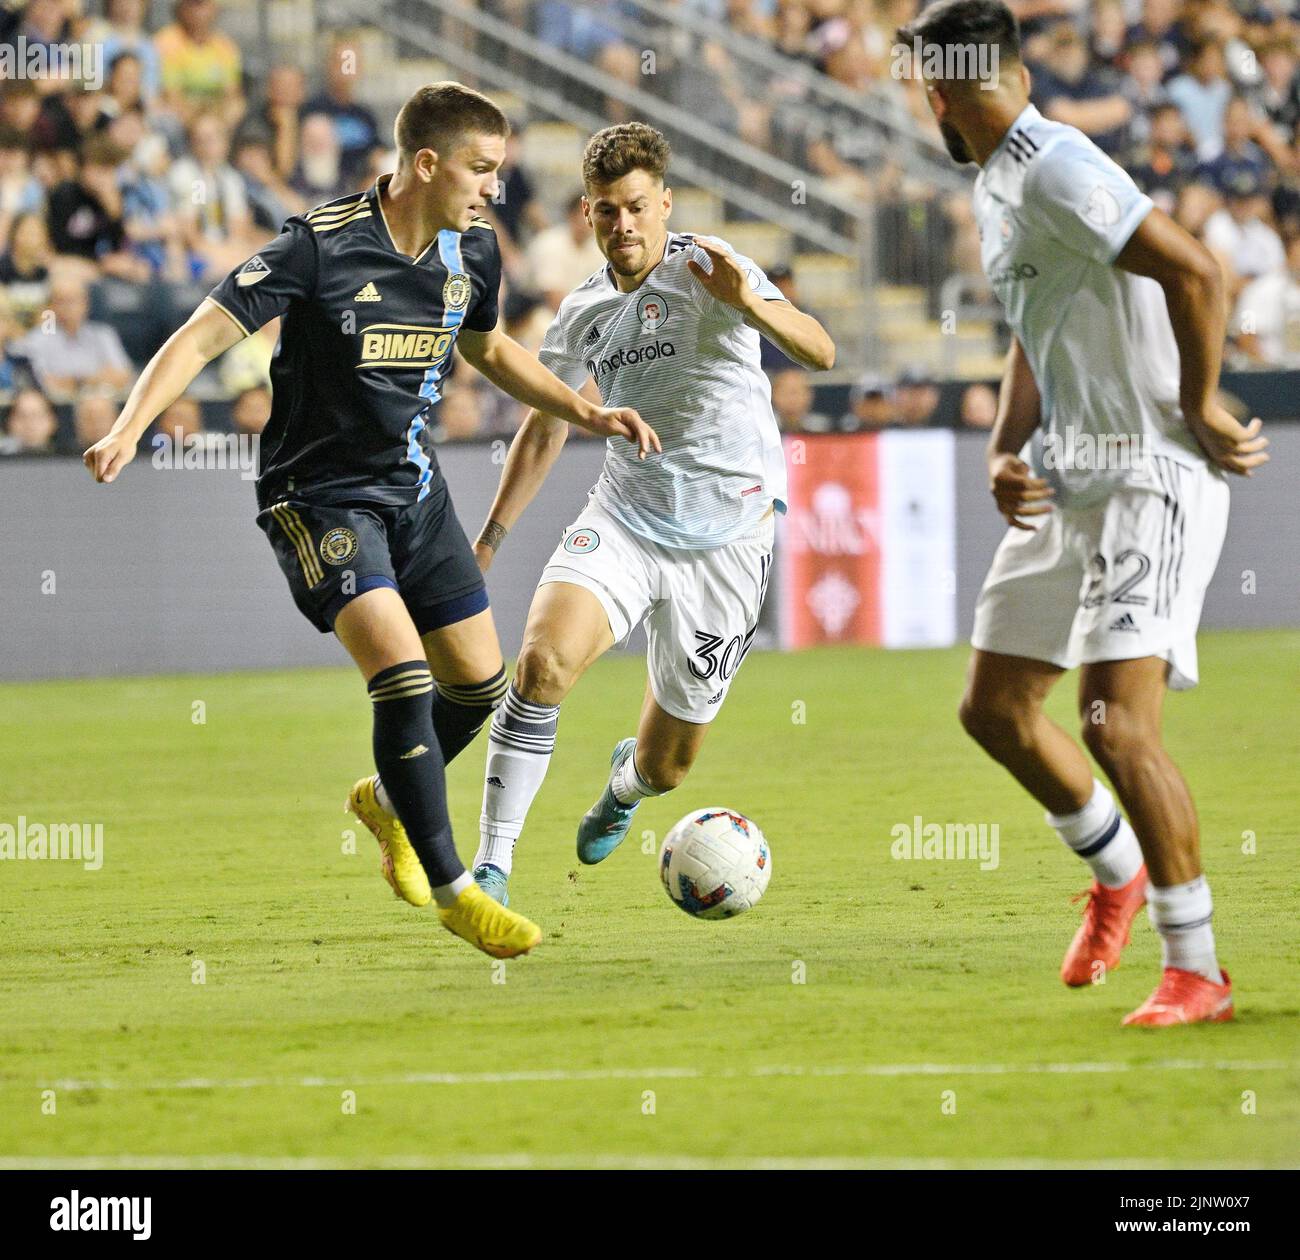 August 13, 2022: August13, 2022, Chester PA- Philadelphia Union player, DANIEL GAZDAG (6) fights for the ball against Chicago Fire players GASTON GIMENEZ (30) and MAURICIO PINEDA (22) during the match at Subaru Park in Chester PA (Credit Image: © Ricky Fitchett/ZUMA Press Wire) Stock Photo